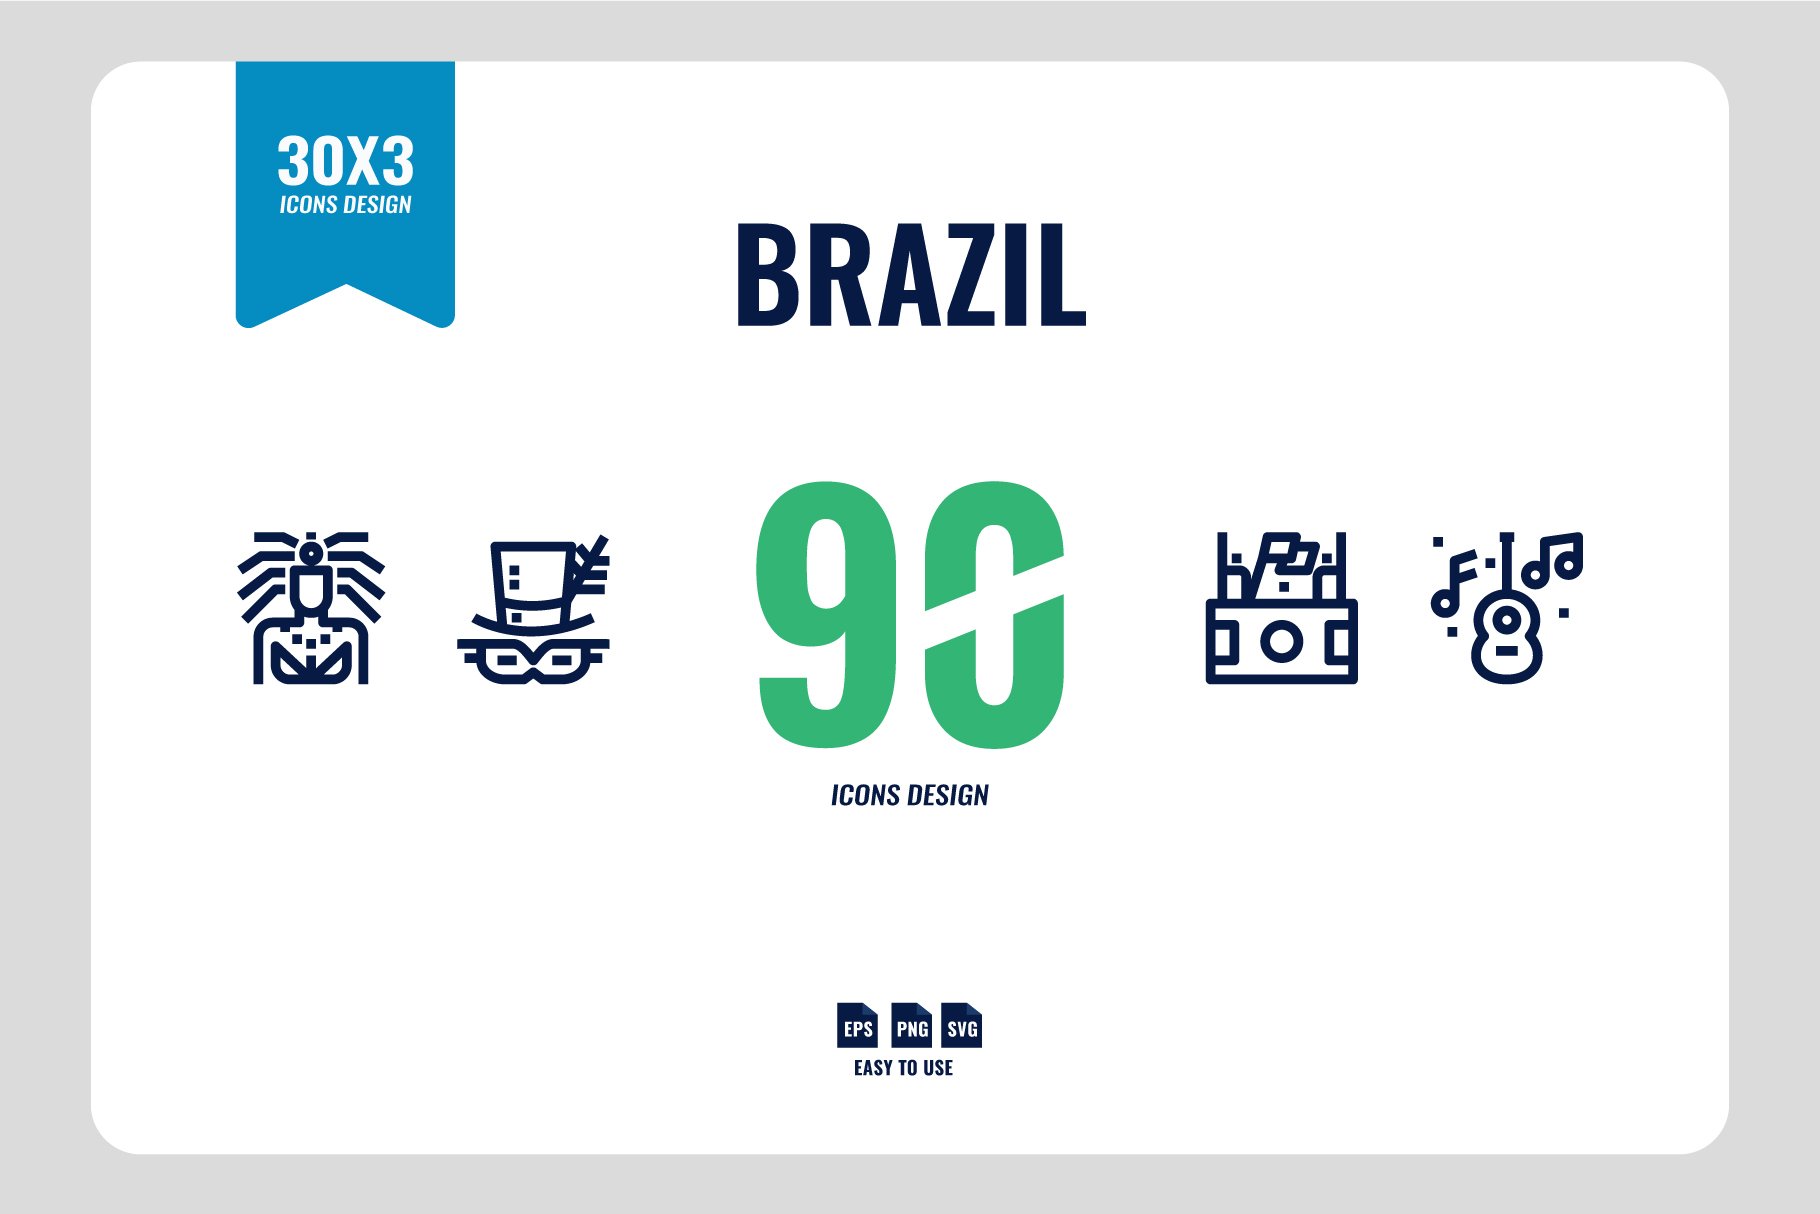 Brazil 90 Icons cover image.